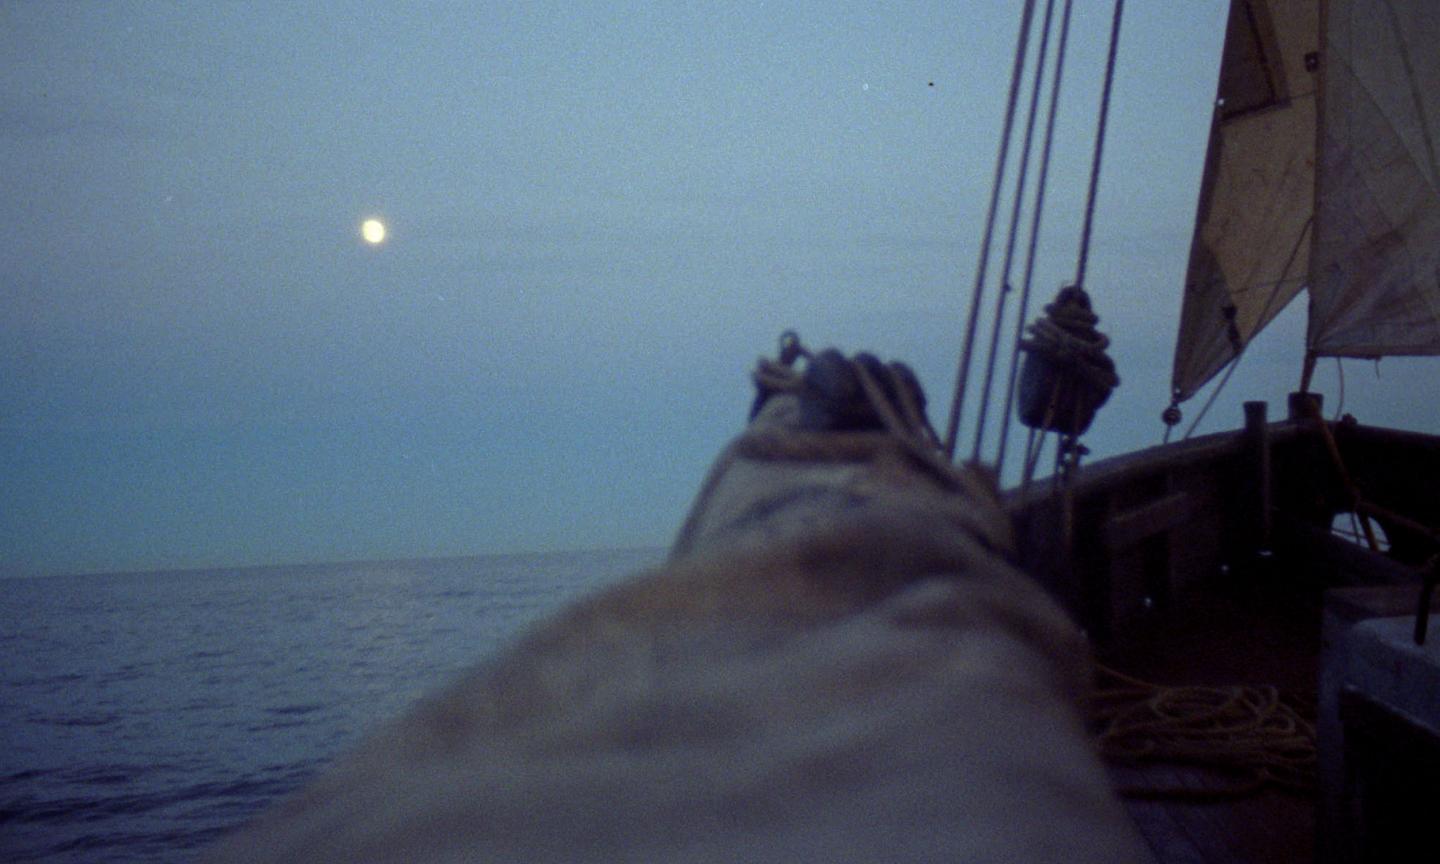 The sky and sea are a dark blue colour with the moon in the background. To the right of the image is a partial view of a sailing vessel and rigging.